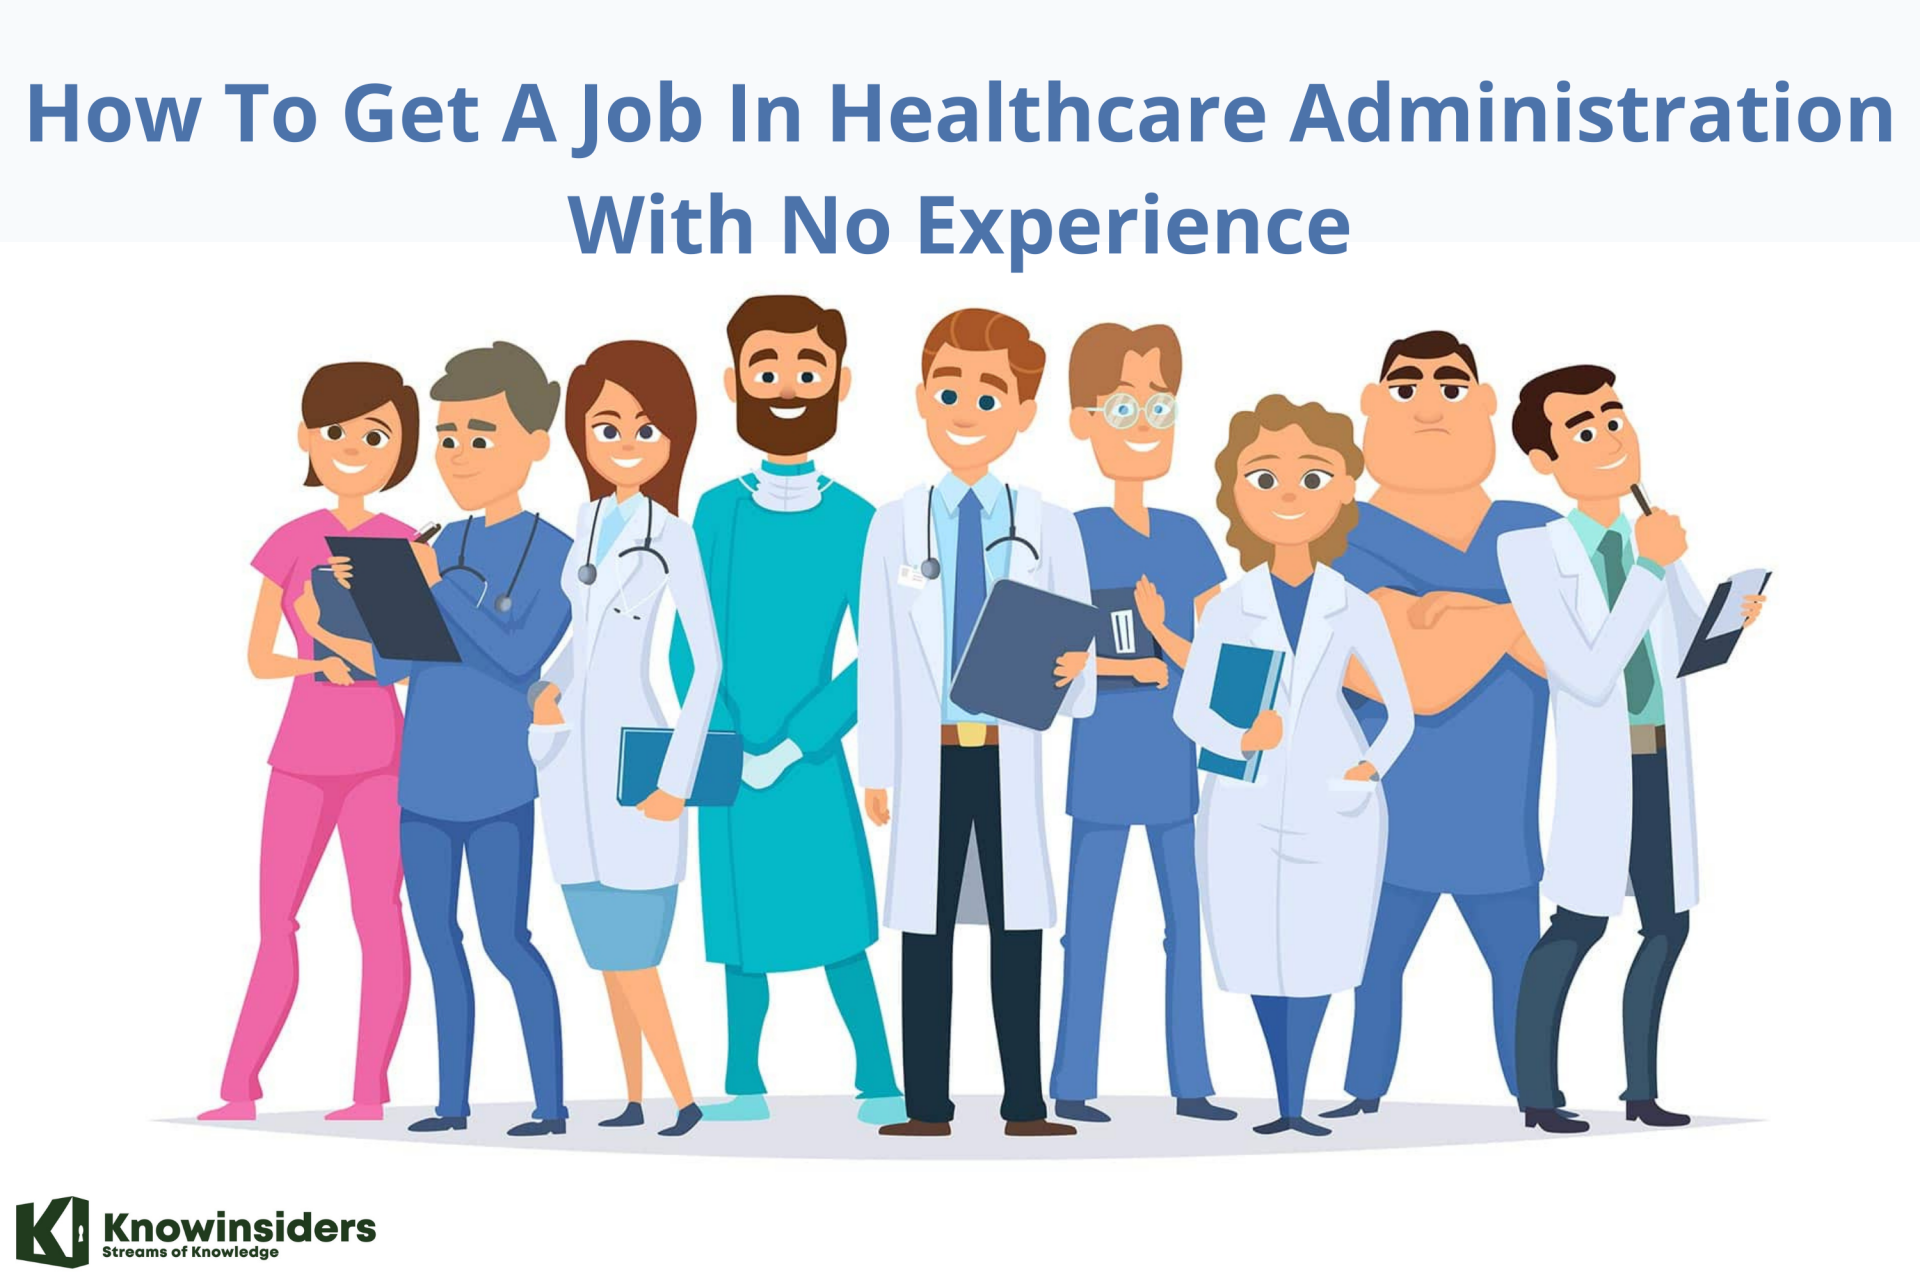 How To Get A Job In Healthcare Administration With No Experience